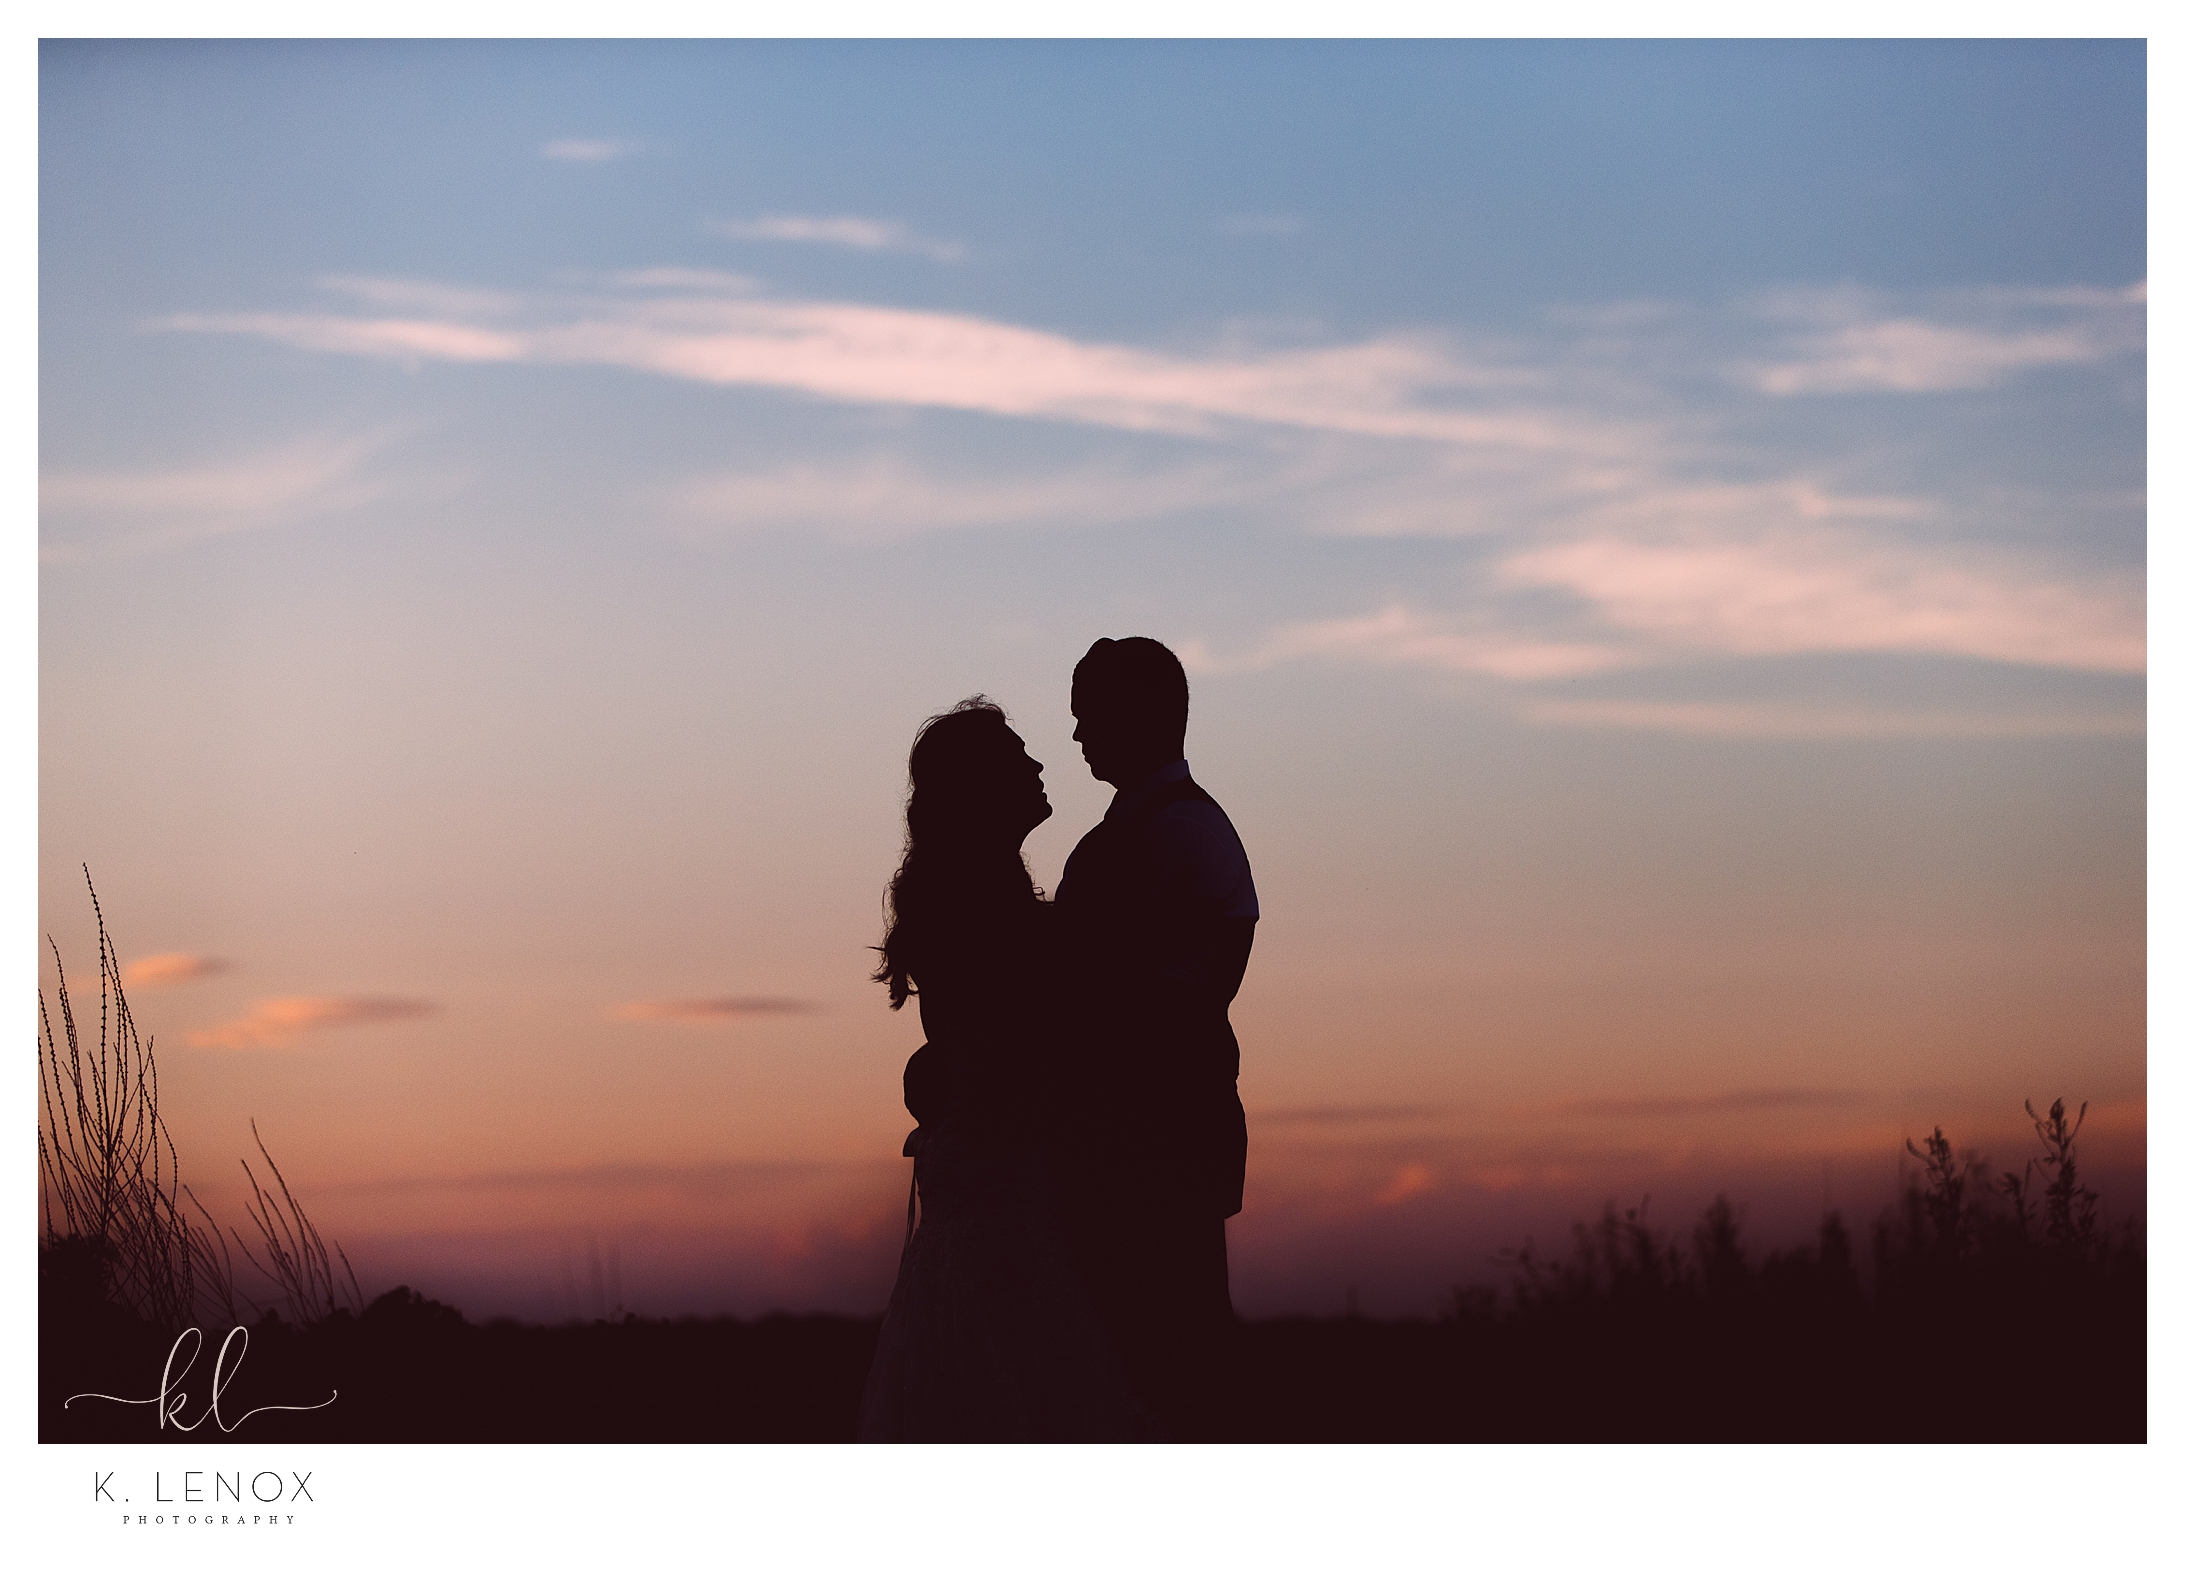 Silhouette of a man and woman at dusk while at the beach 